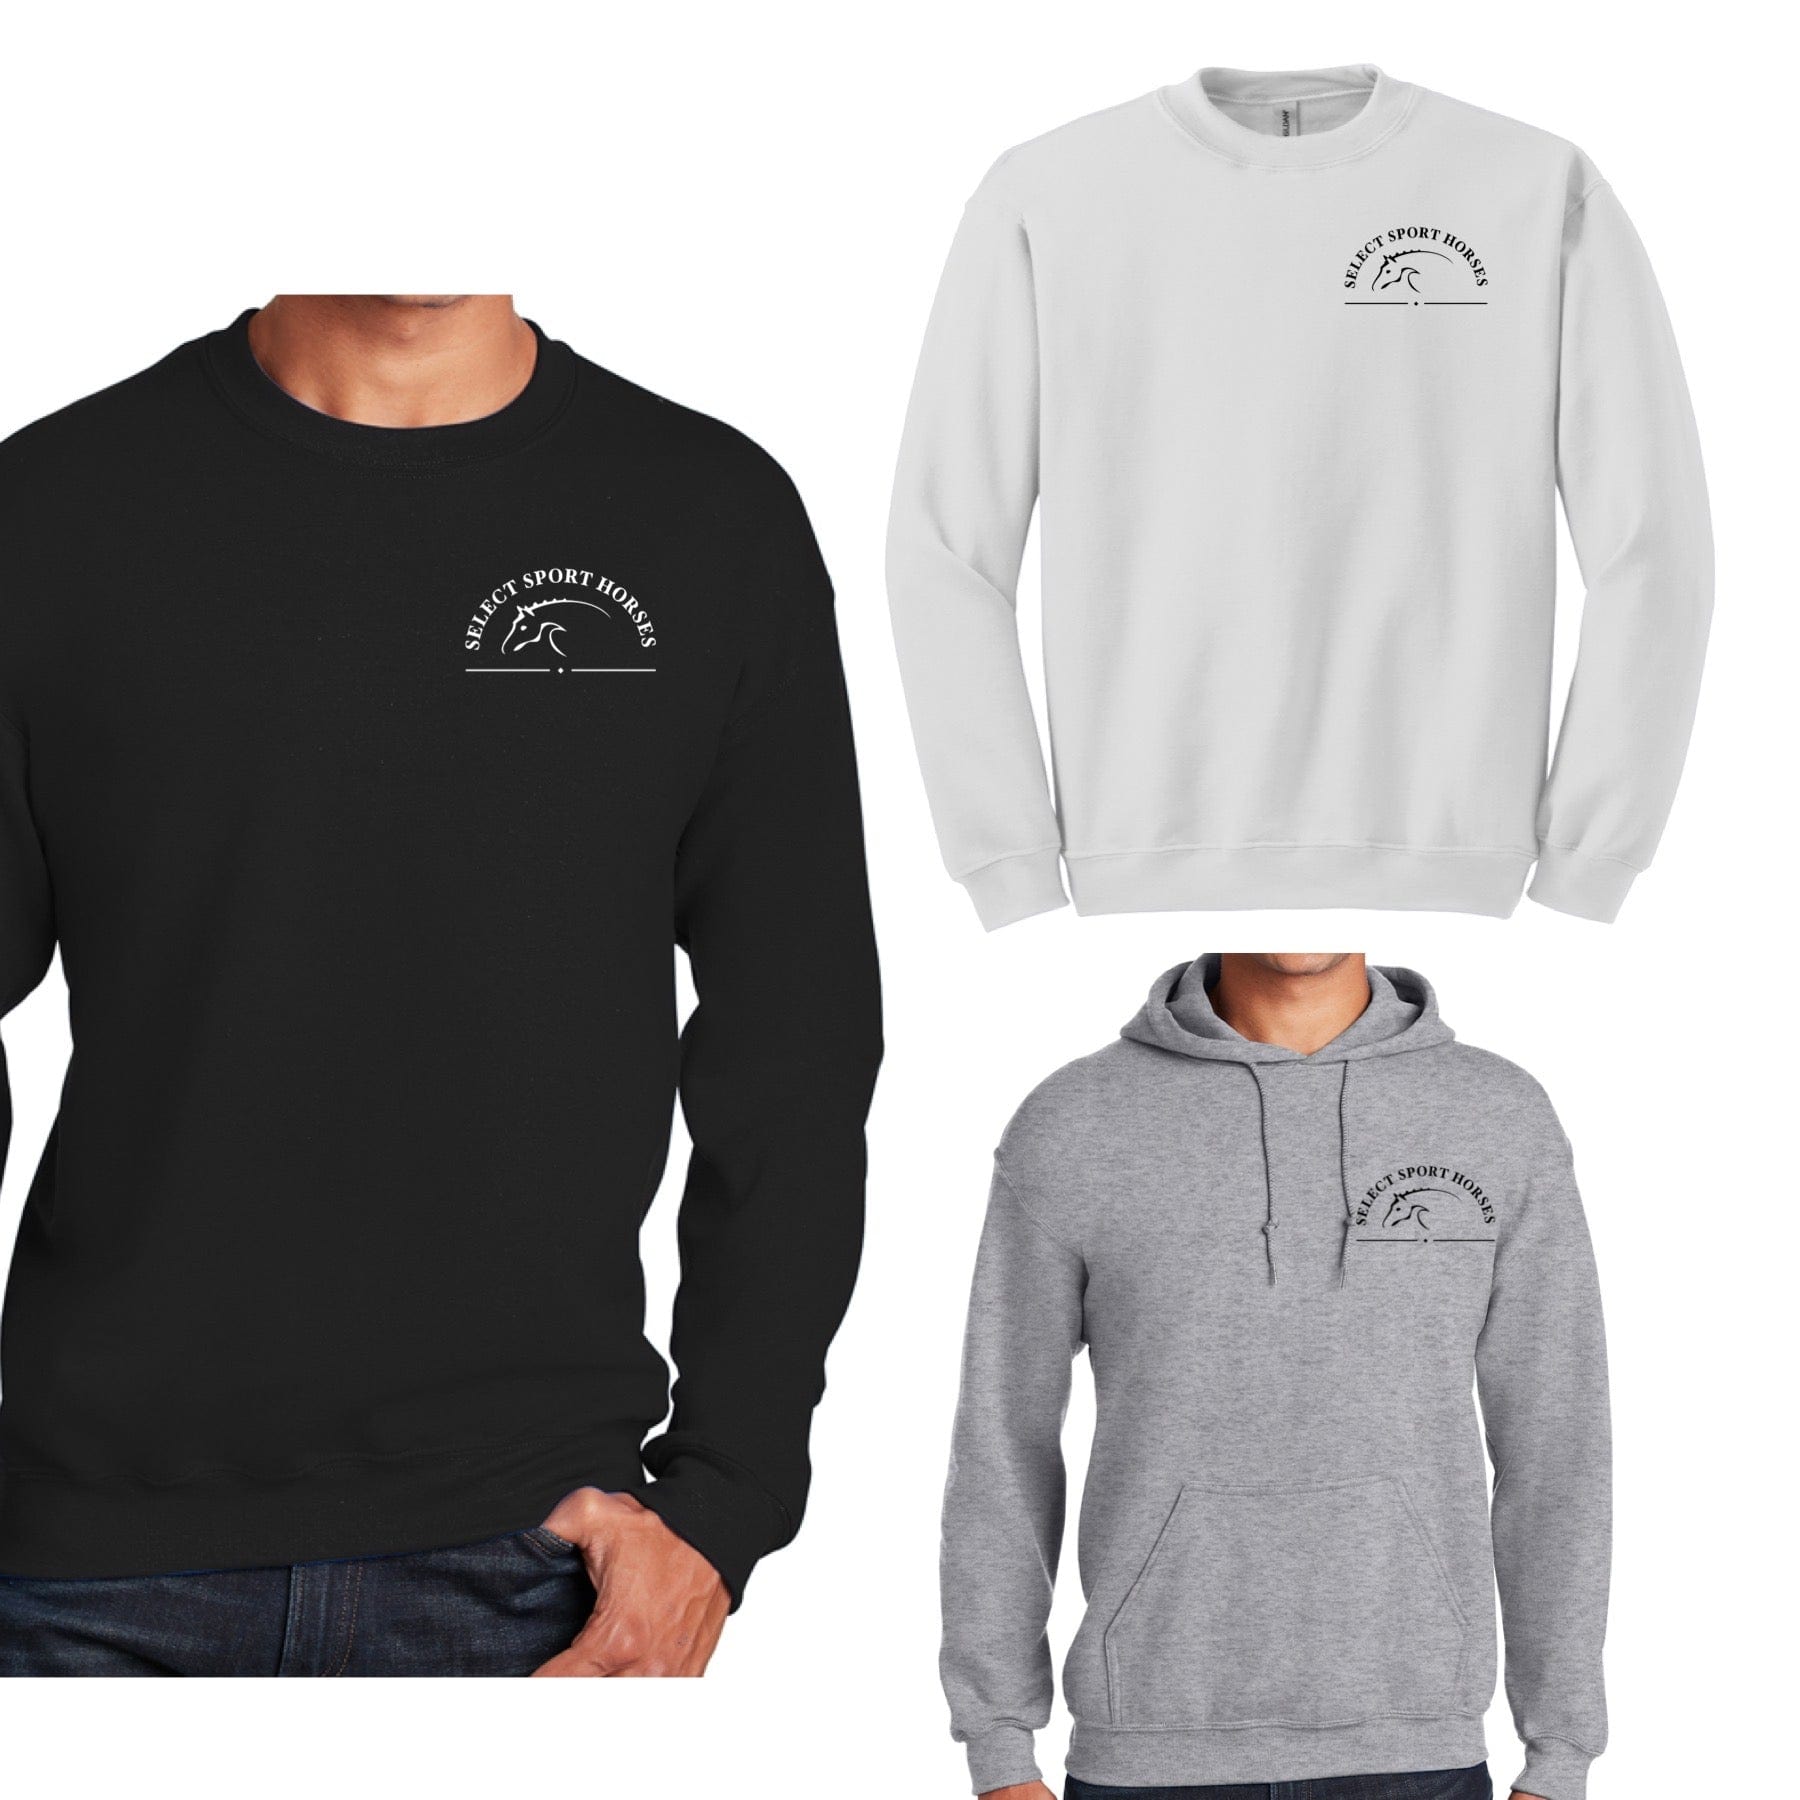 Equestrian Team Apparel Select Sport Horses Sweatshirt equestrian team apparel online tack store mobile tack store custom farm apparel custom show stable clothing equestrian lifestyle horse show clothing riding clothes horses equestrian tack store